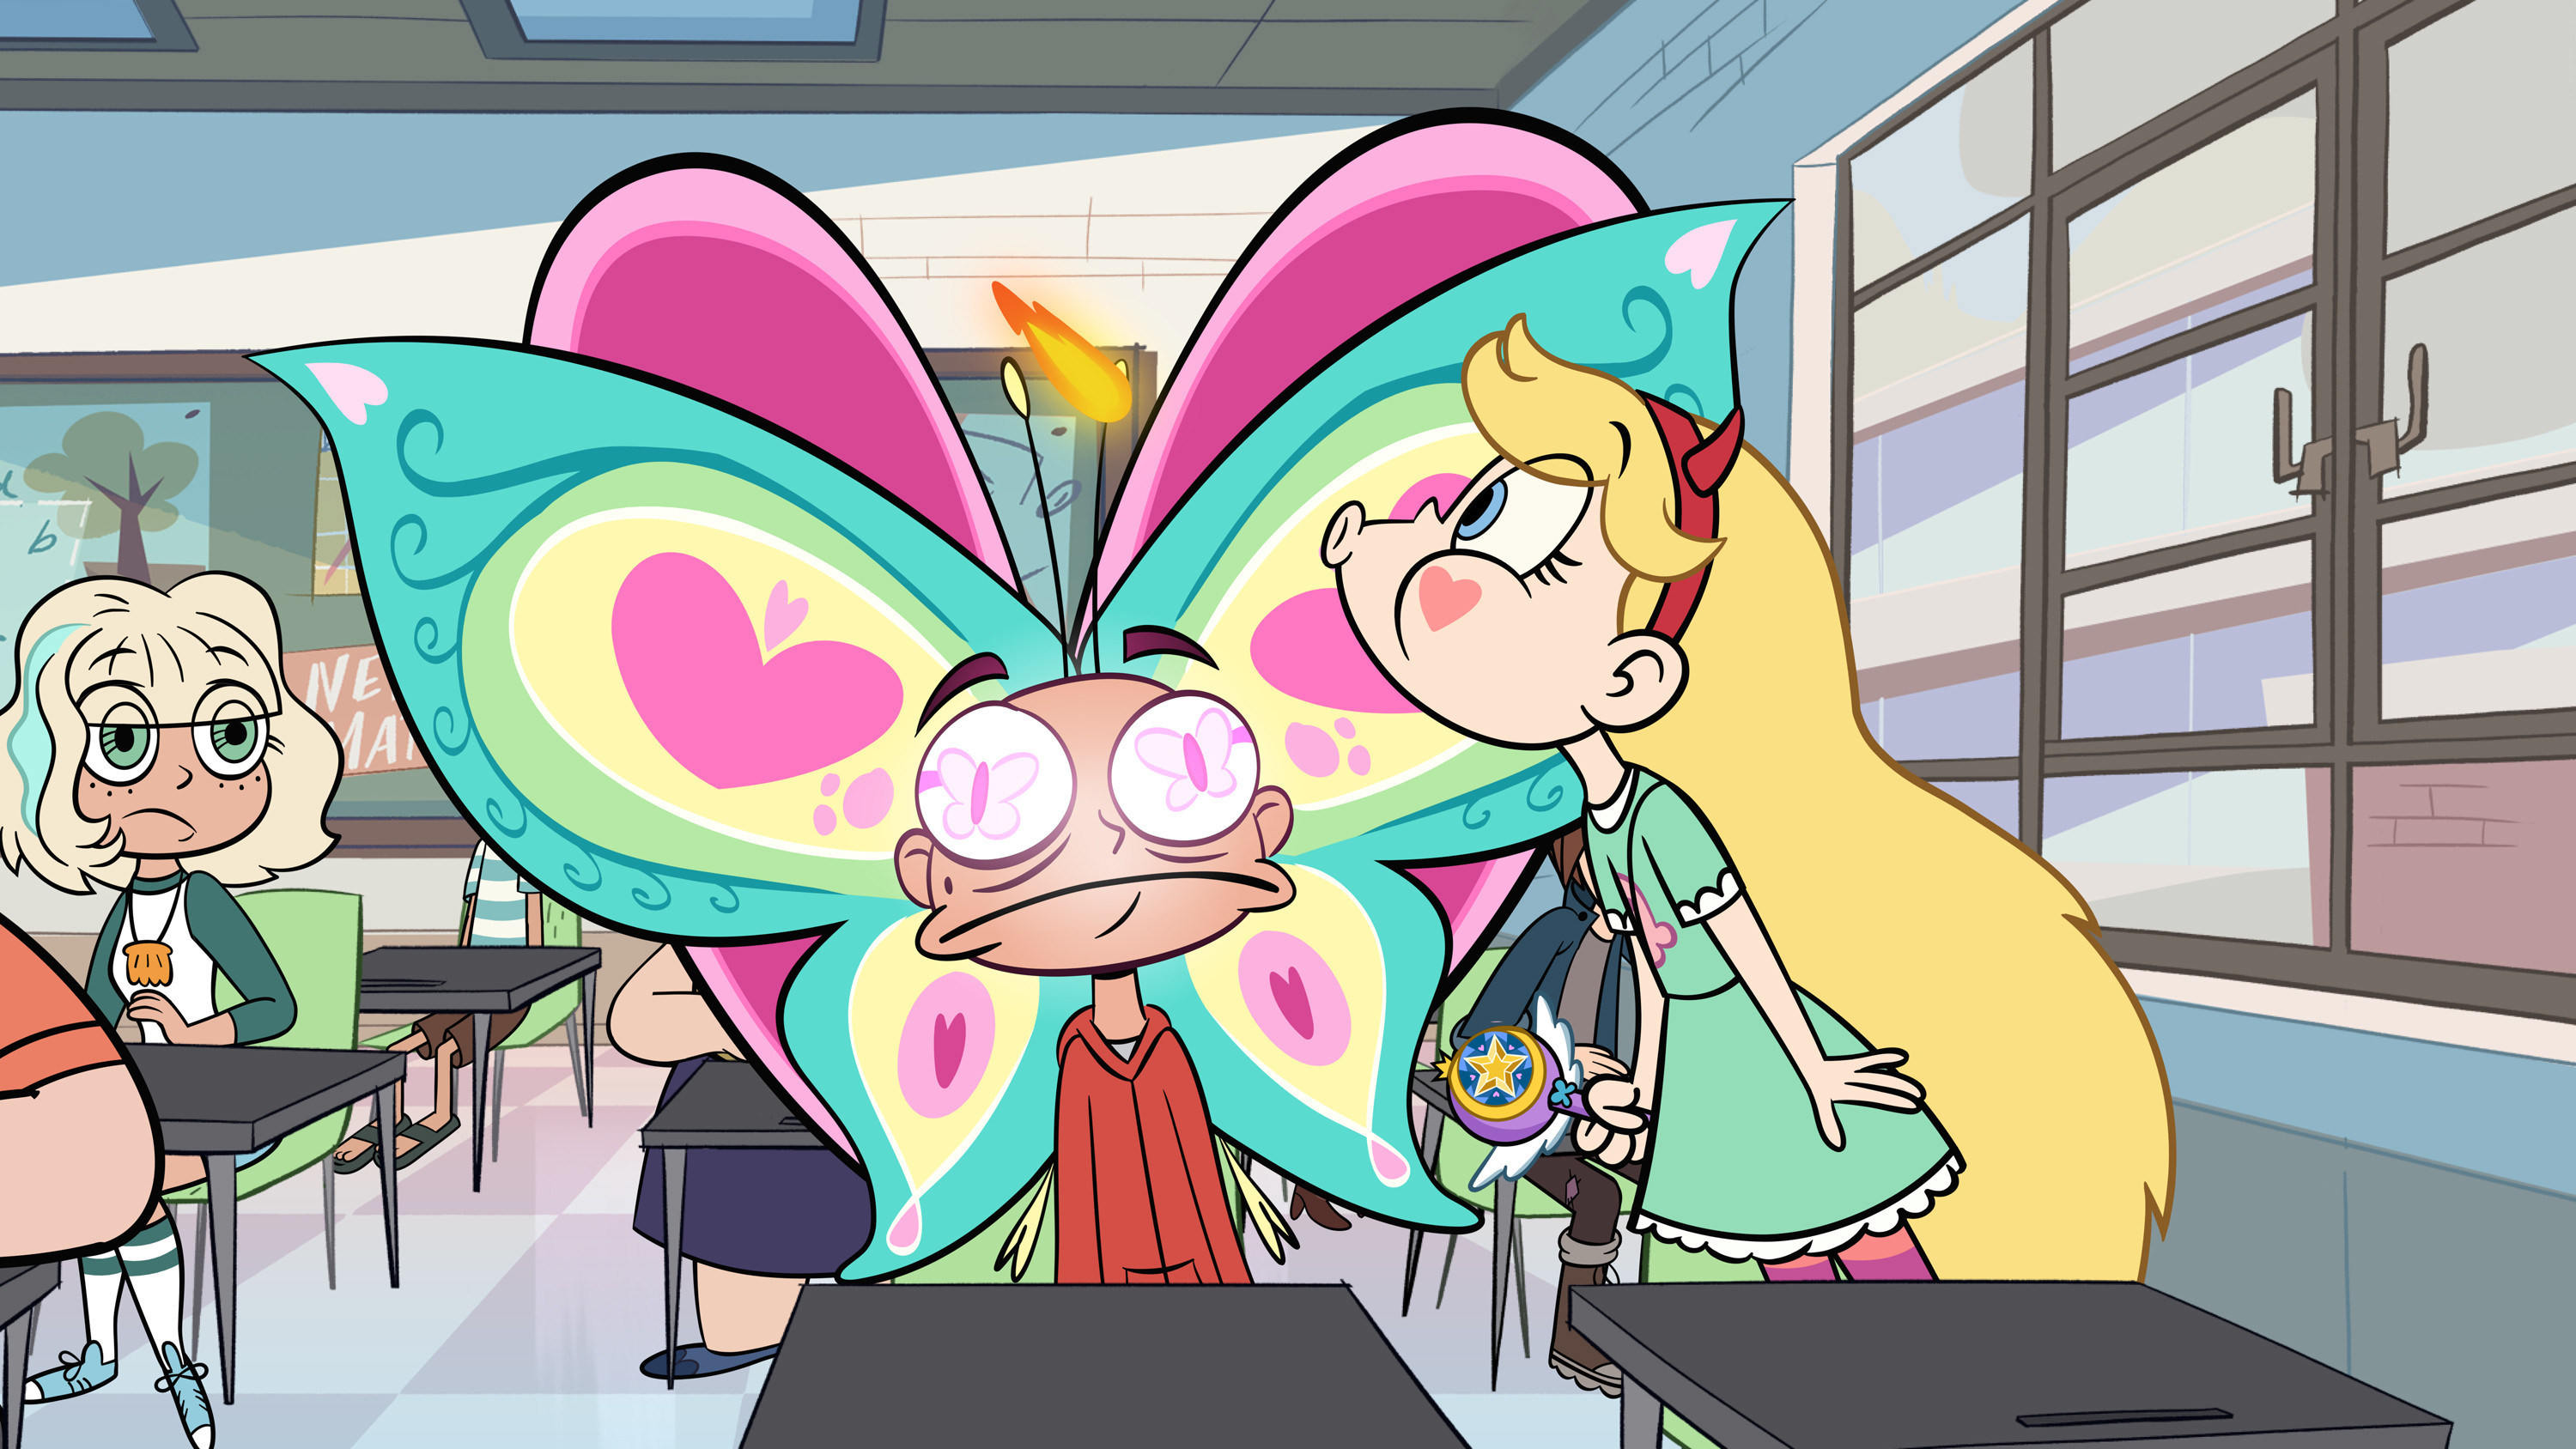 Star vs The forces of Evil Wallpapers 95+ 3000x1688.